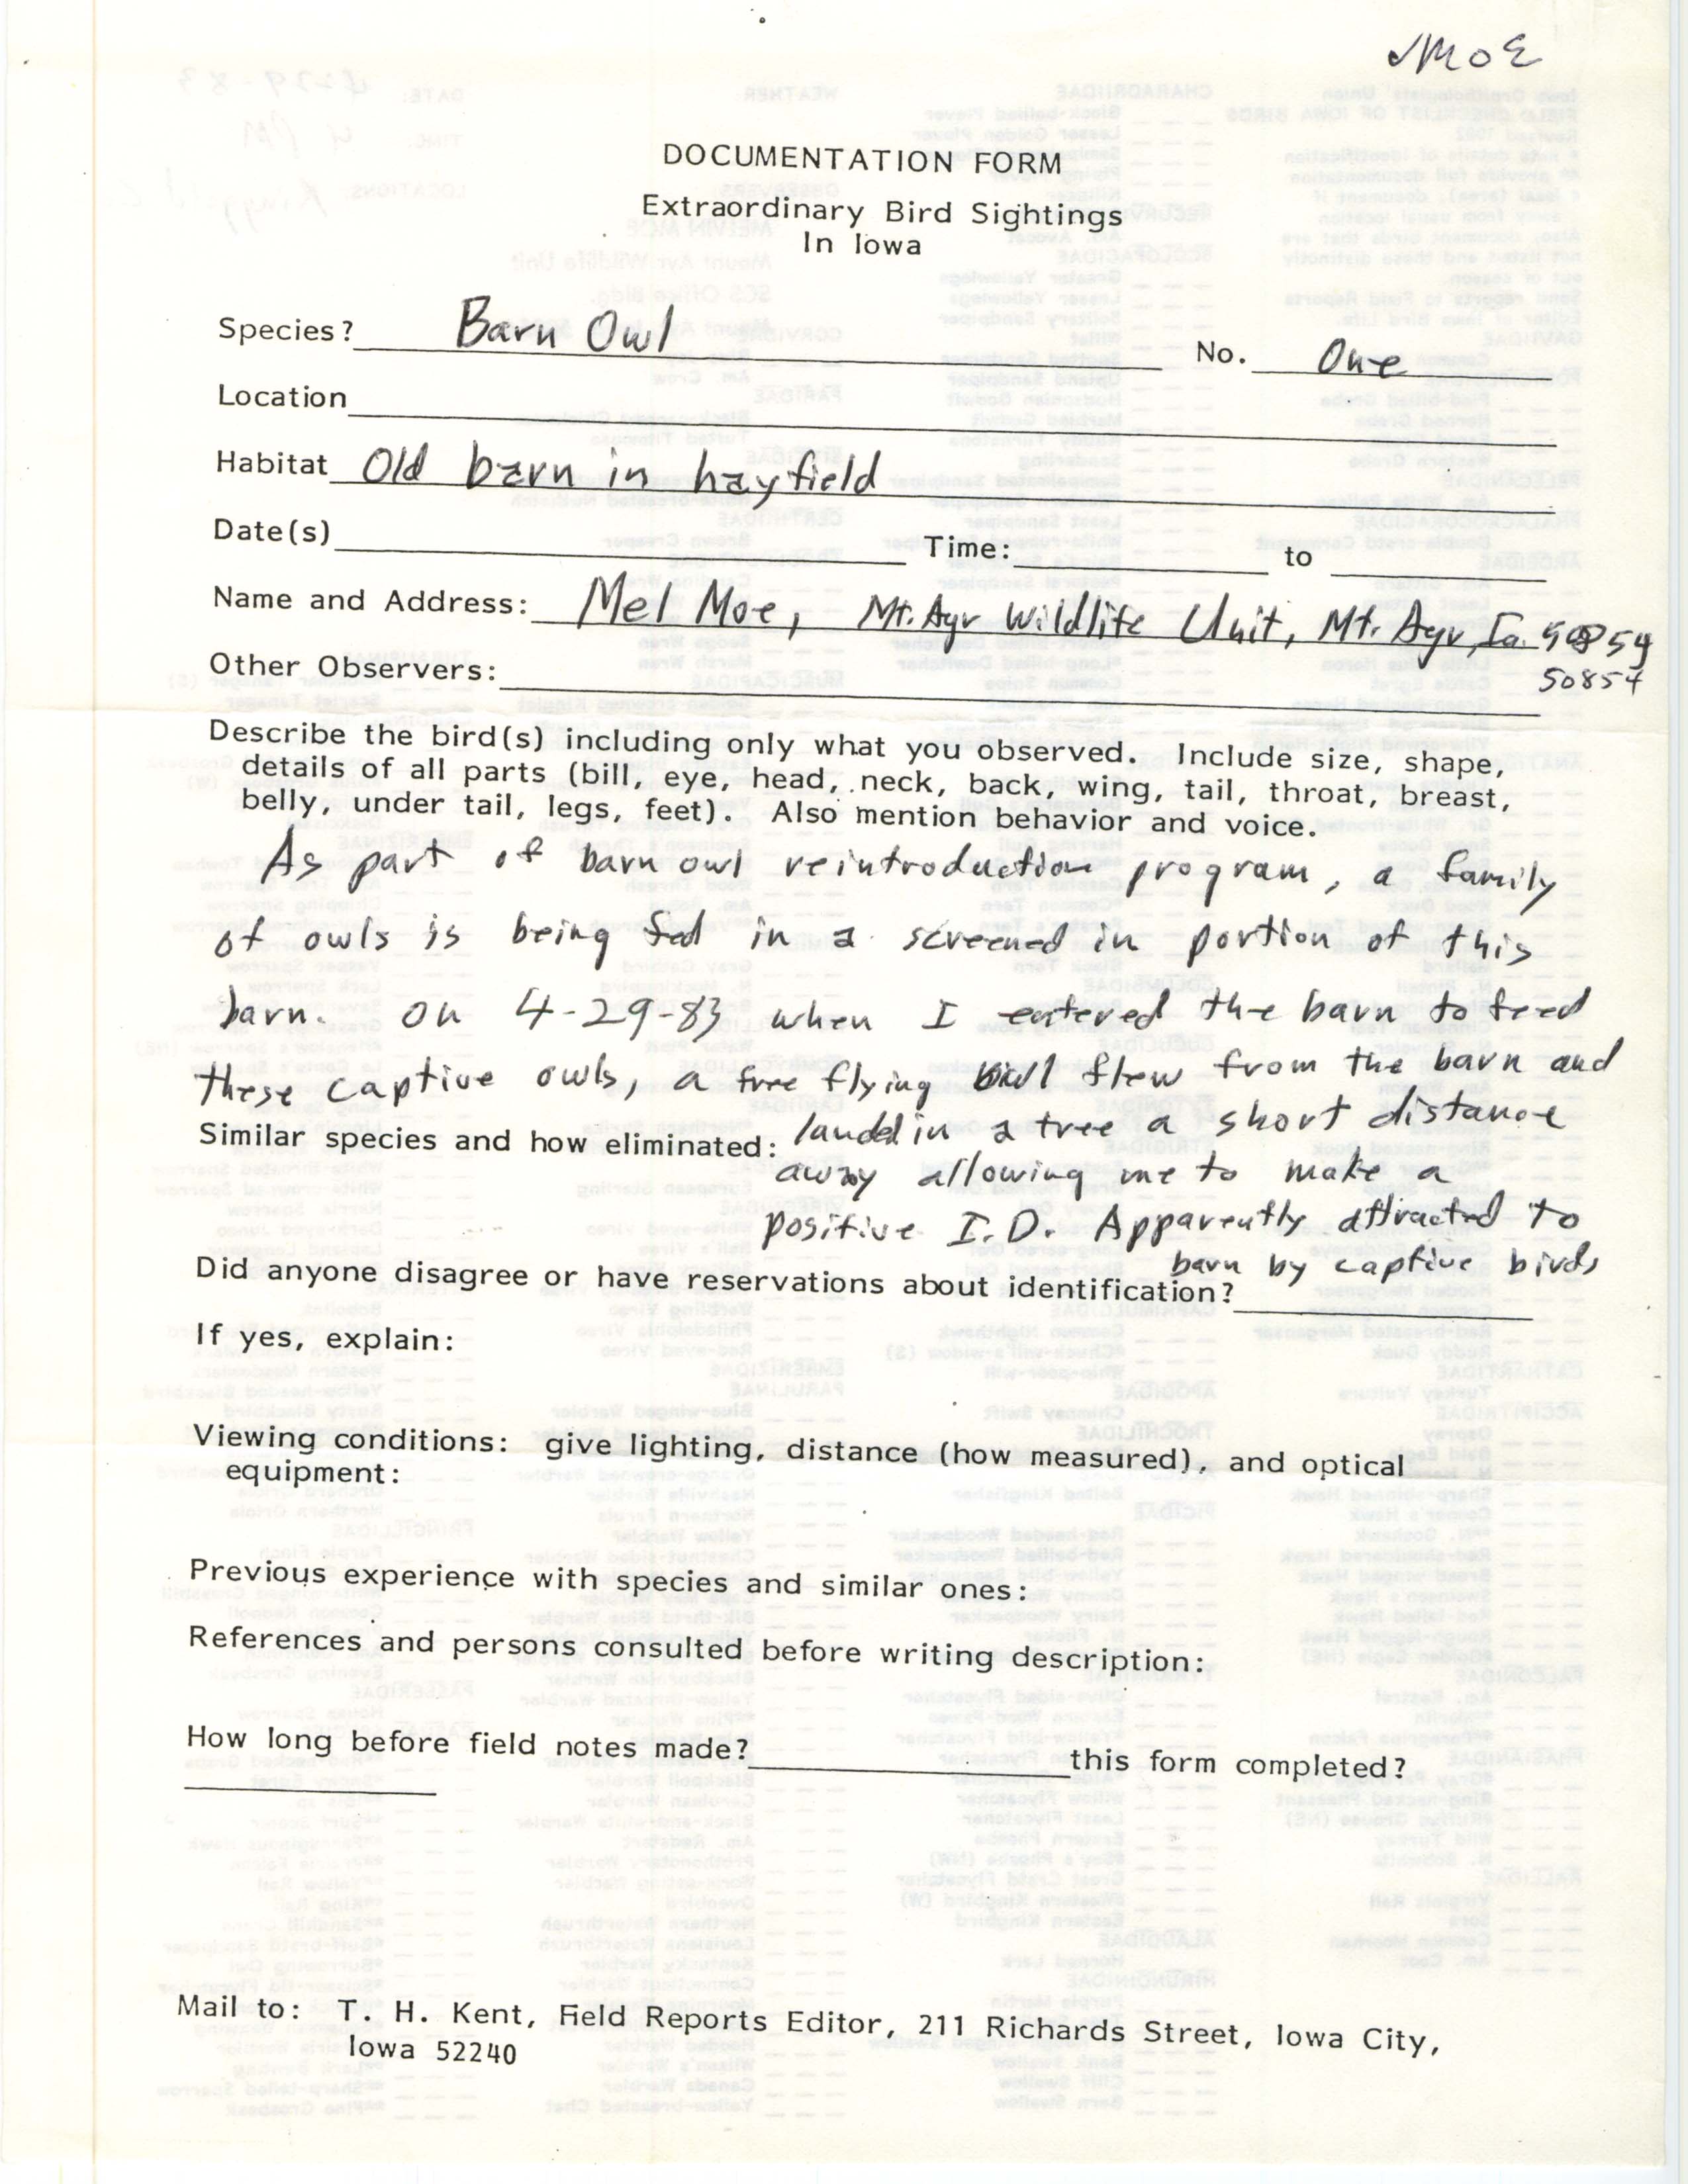 Rare bird documentation form and field checklist for Barn Owl at Mount Ayr State Wildlife Area in 1983